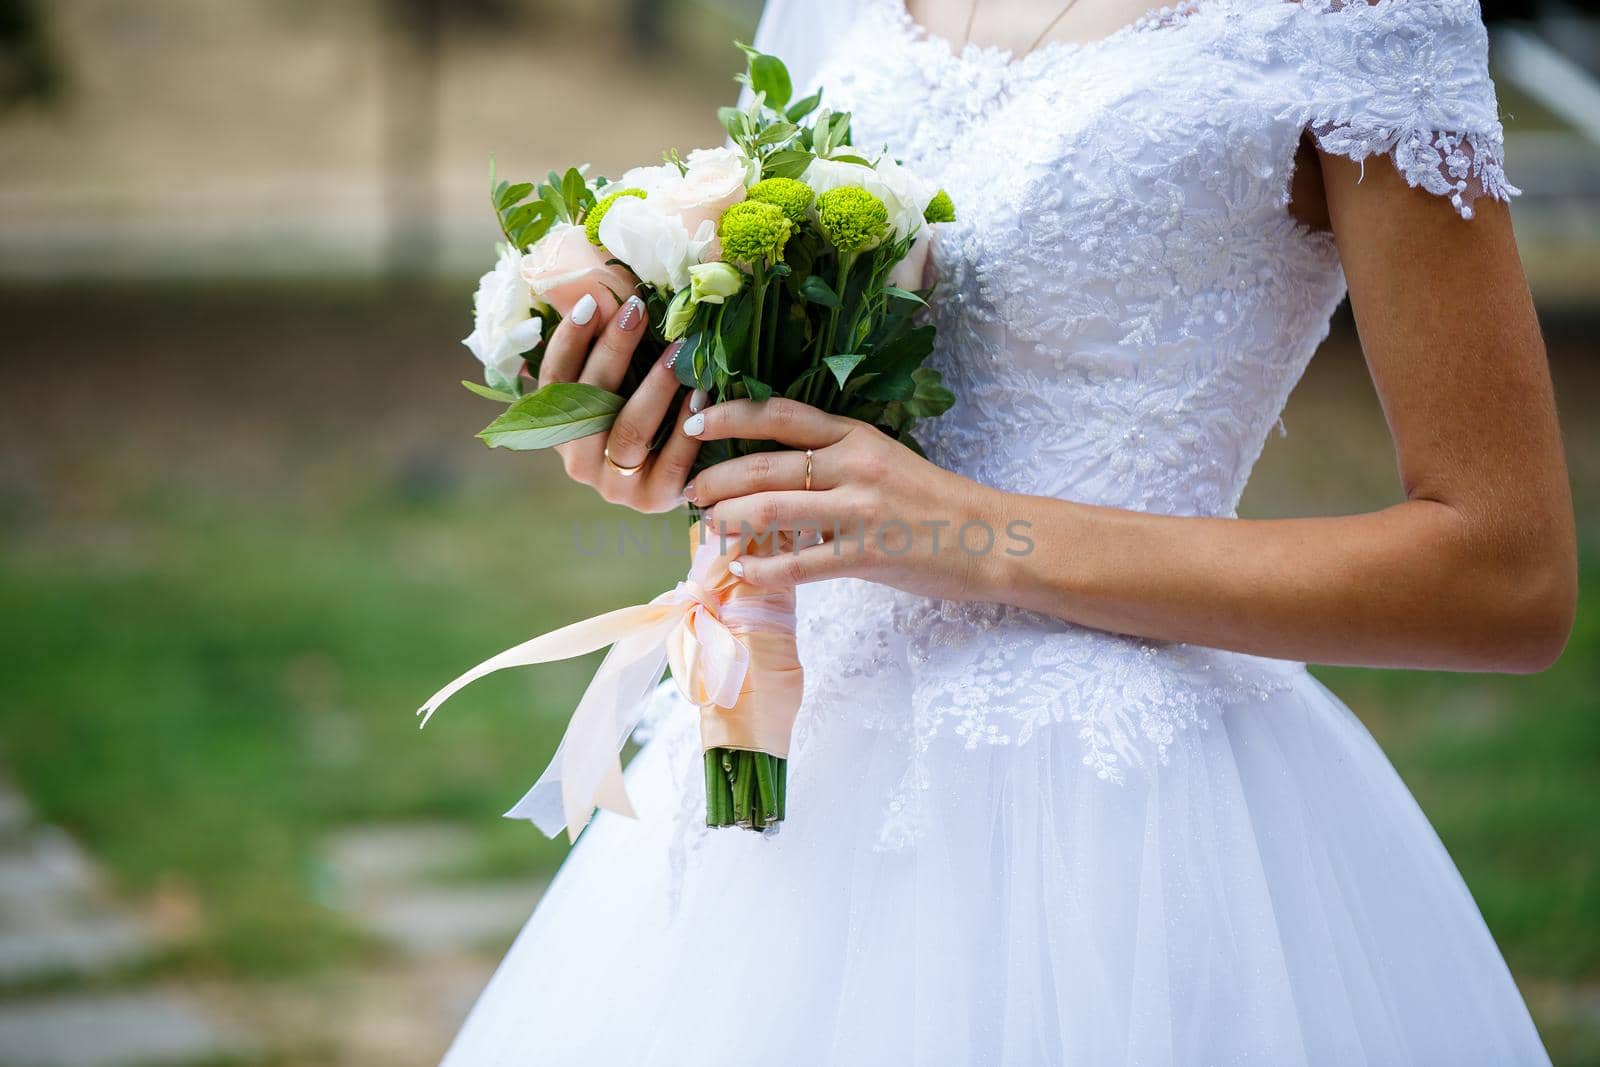 Beautiful wedding bouquet of flowers in the hands of the newlyweds